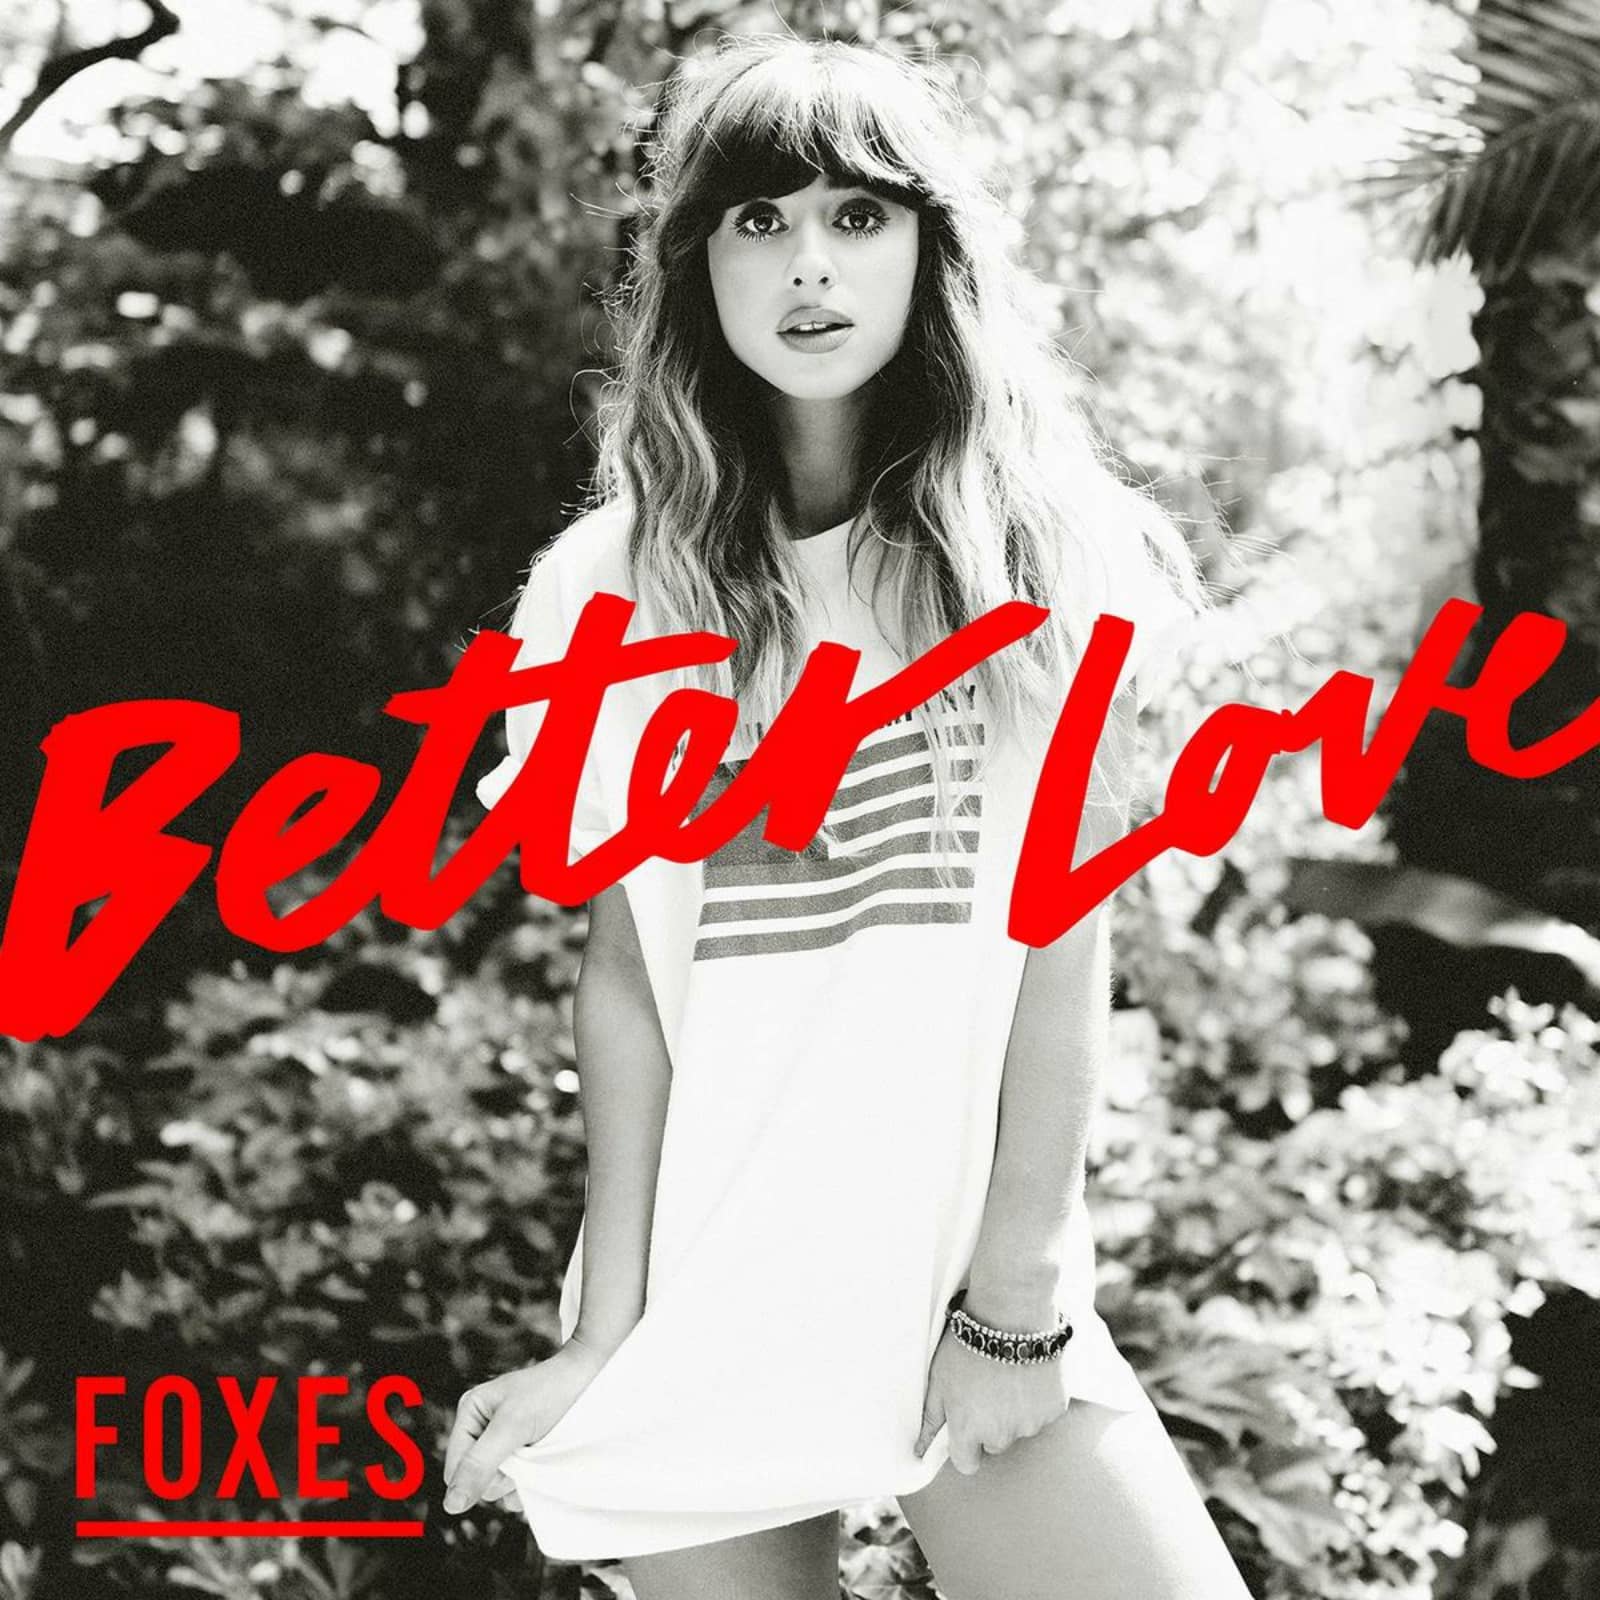 Better love текст. Лиса исполнитель. Foxes Singer hot. Kaveh and Foxes. Body talk Foxes.